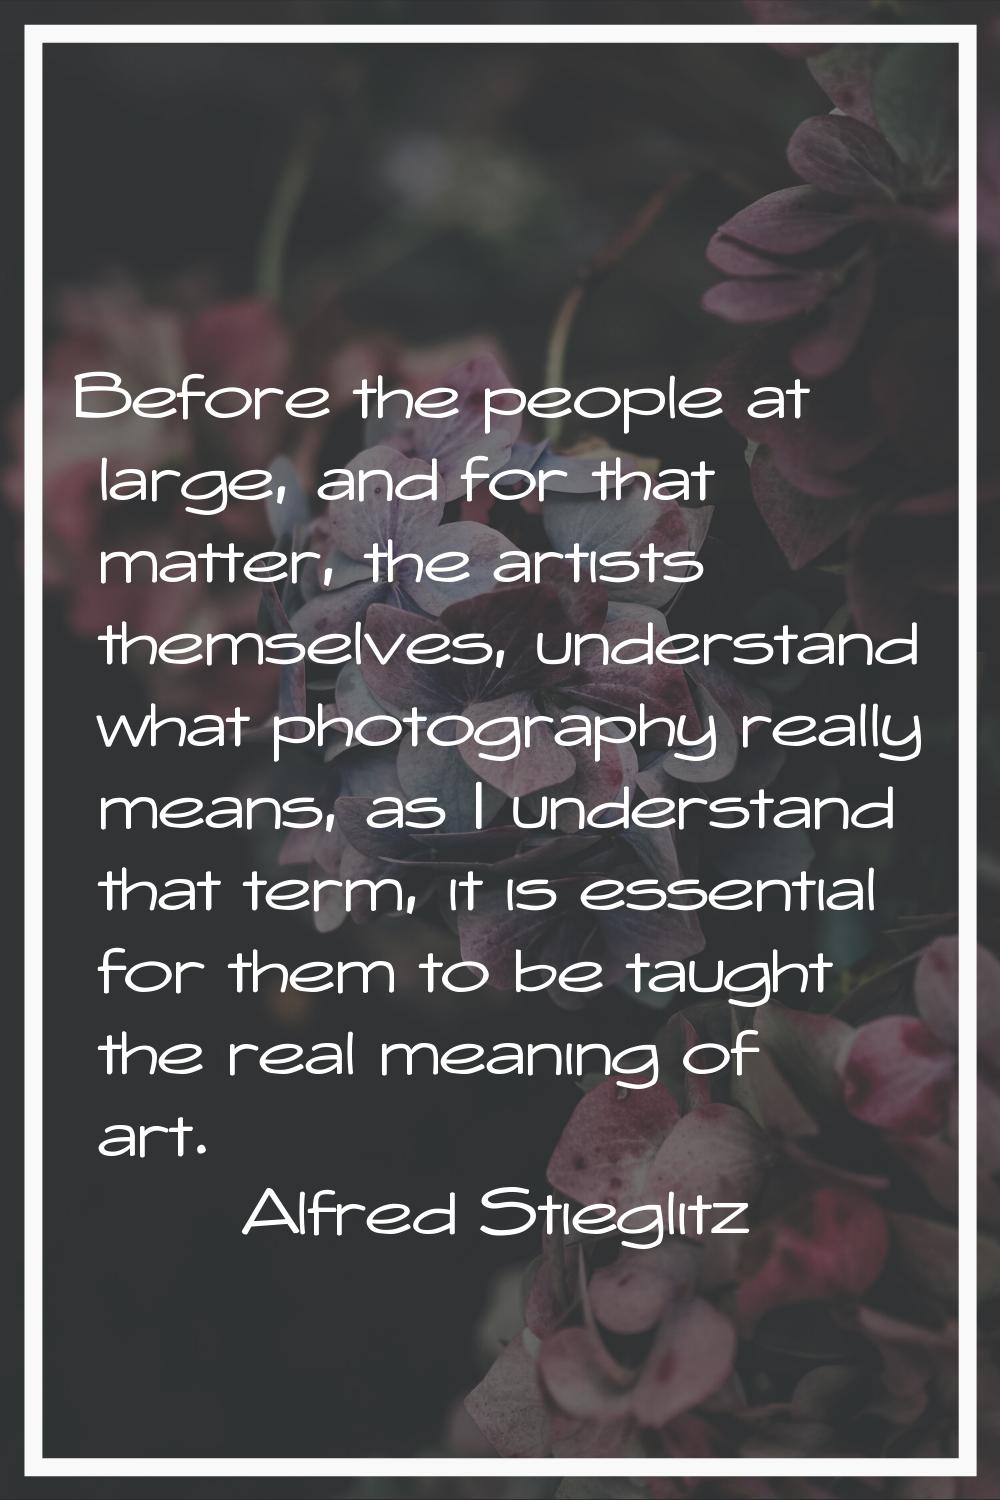 Before the people at large, and for that matter, the artists themselves, understand what photograph